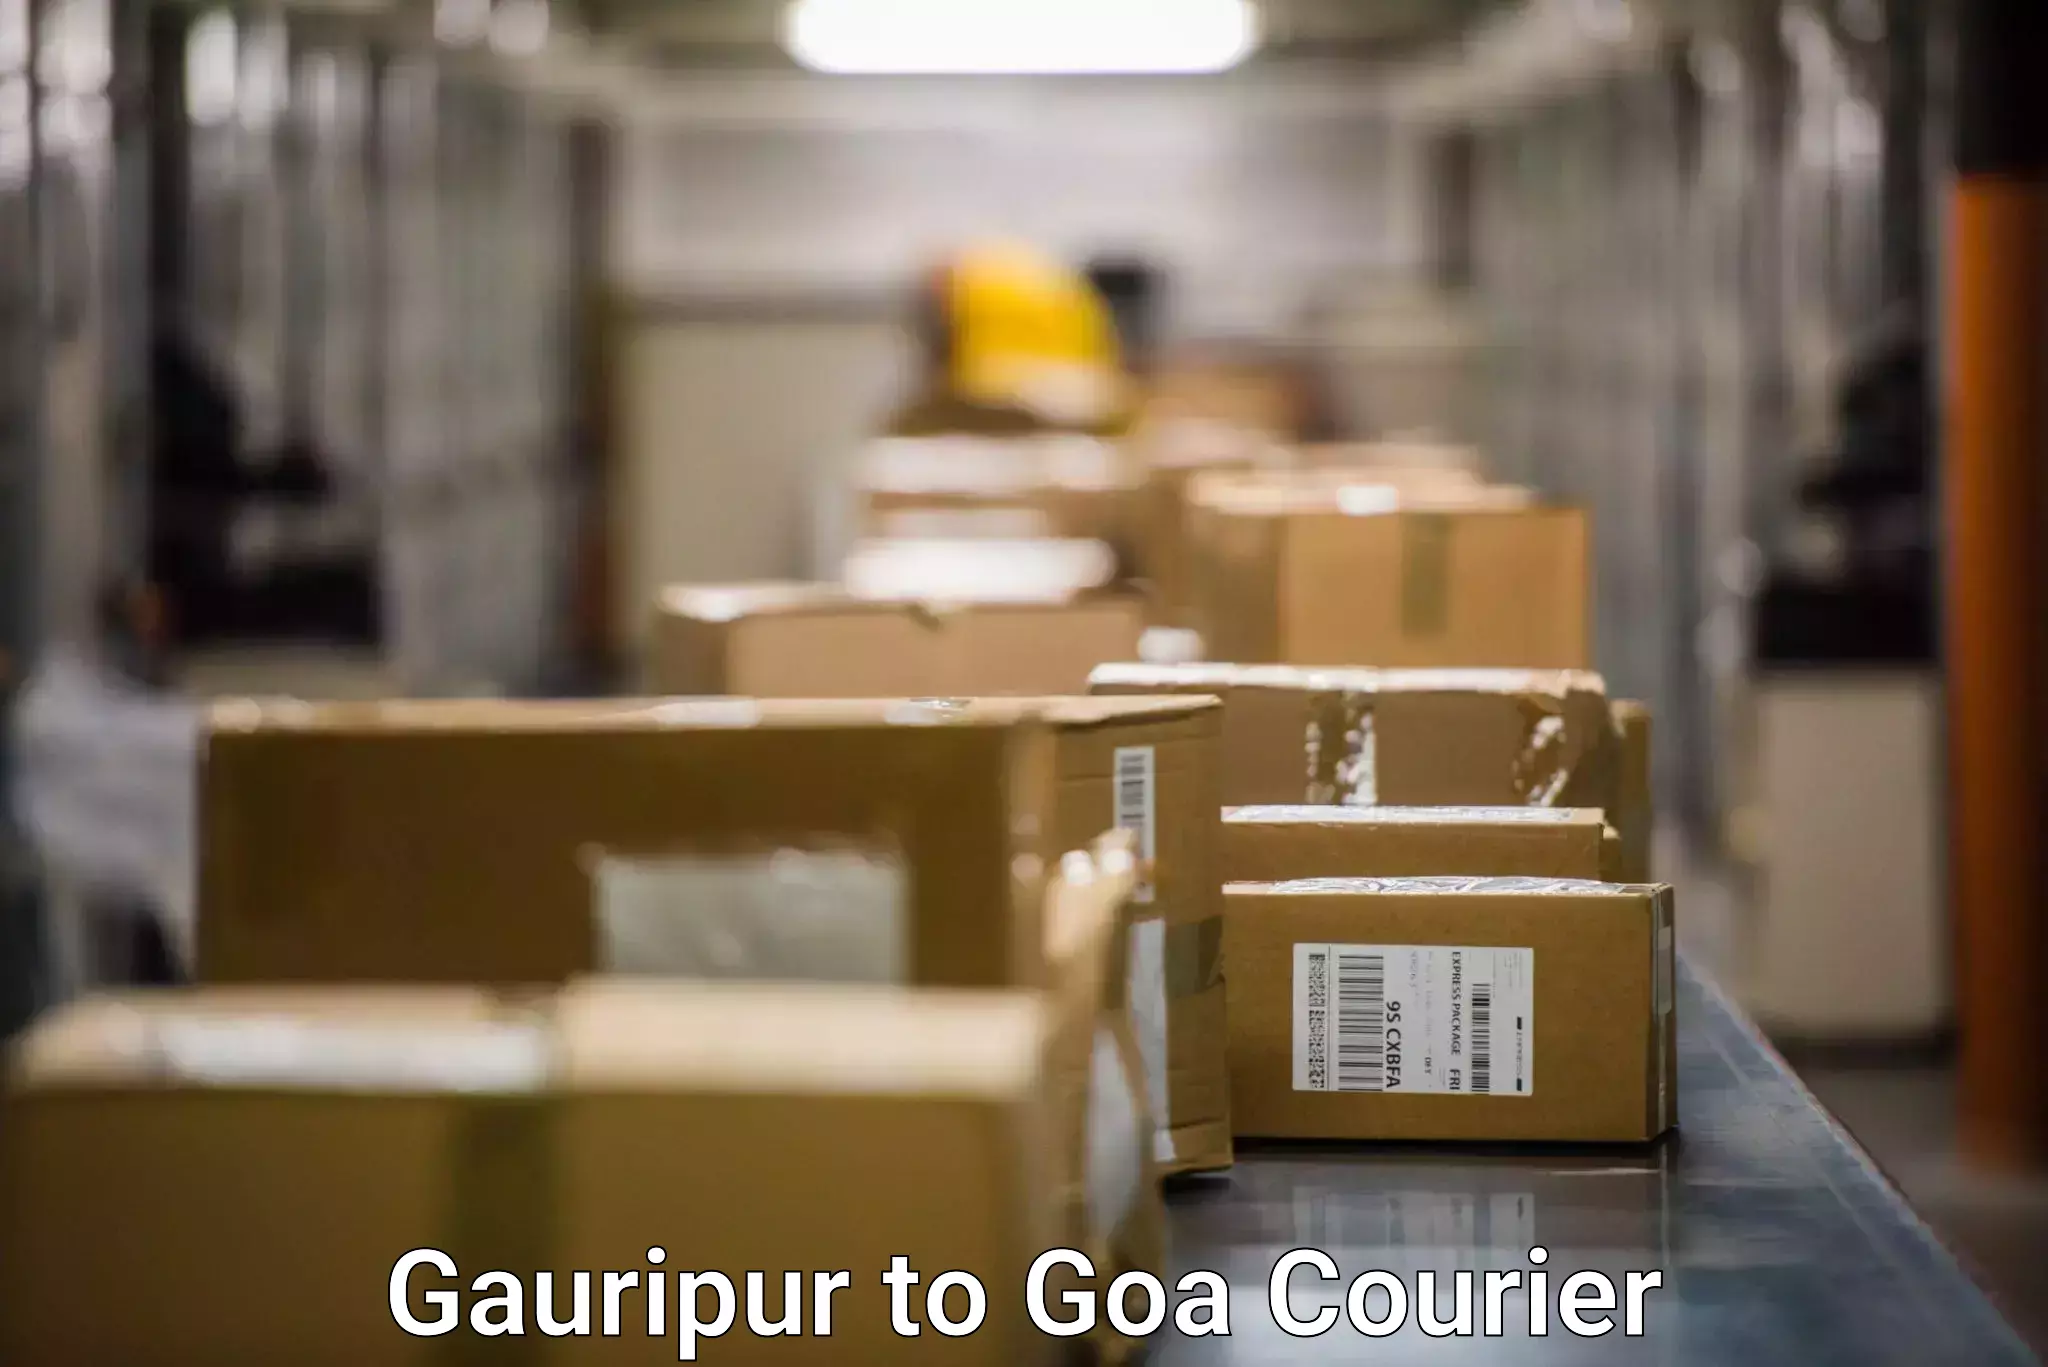 Express postal services Gauripur to Bardez